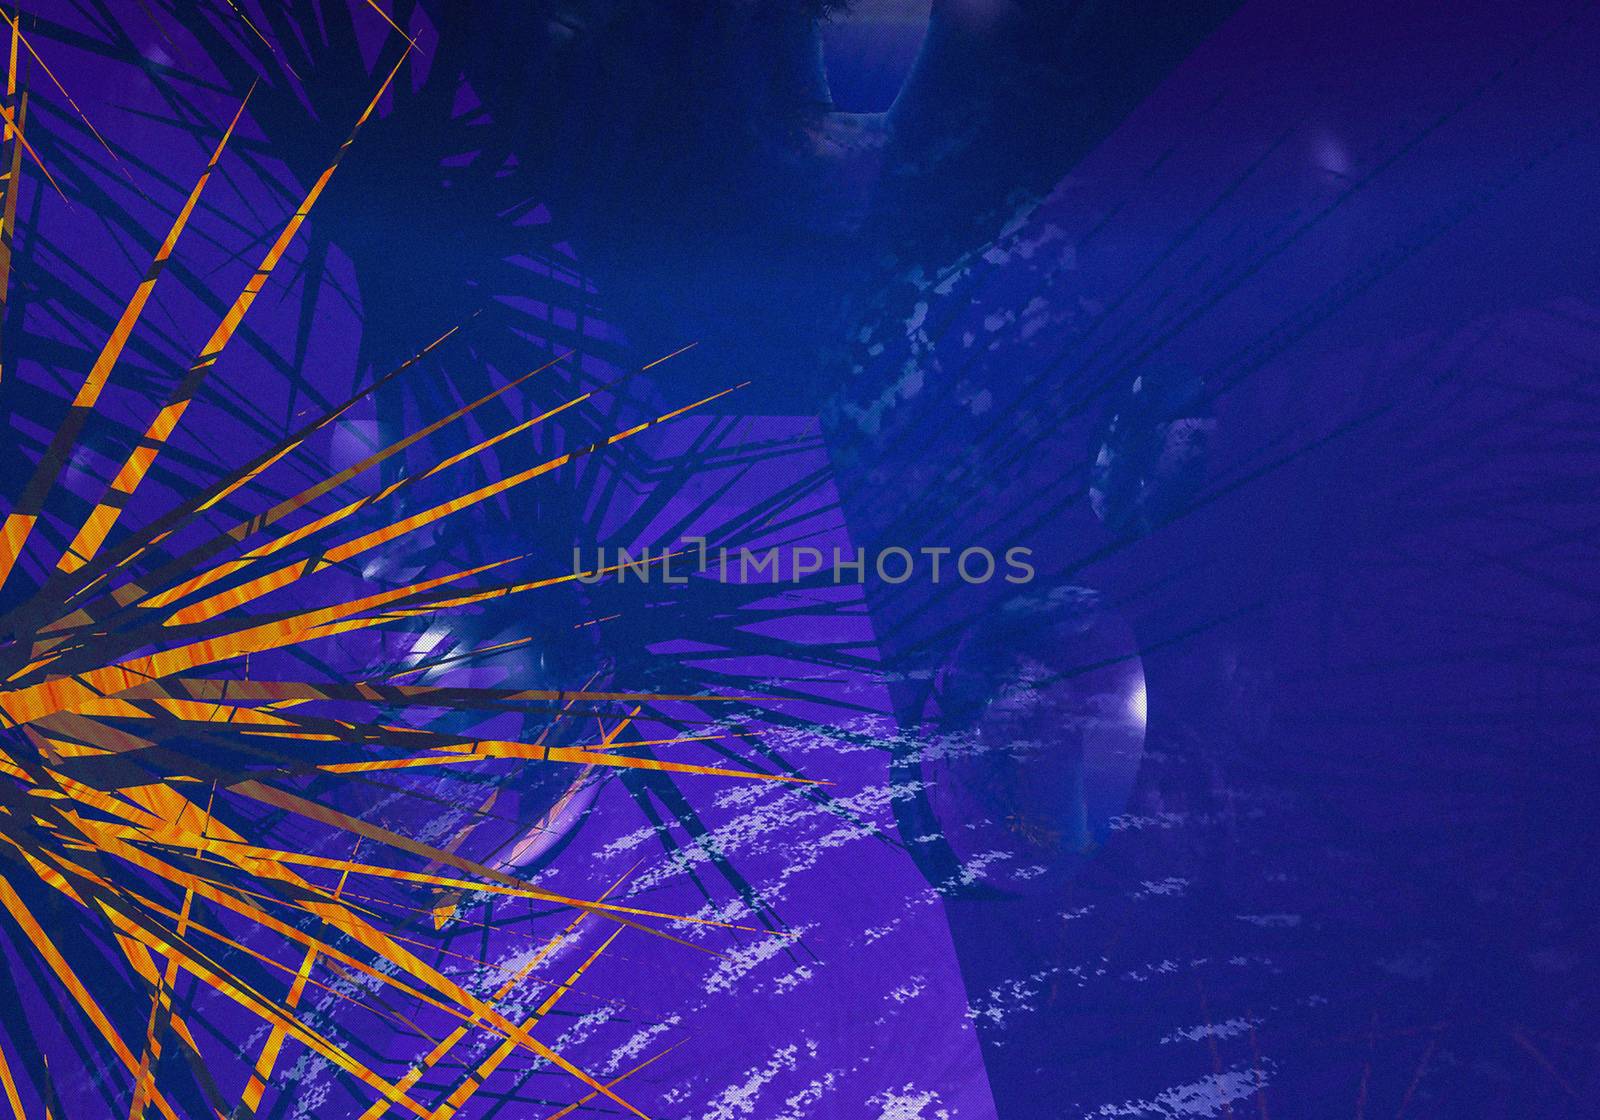 3d image of yellow spikes on a blue background, it 's an abstract textured scene with a bush in a box